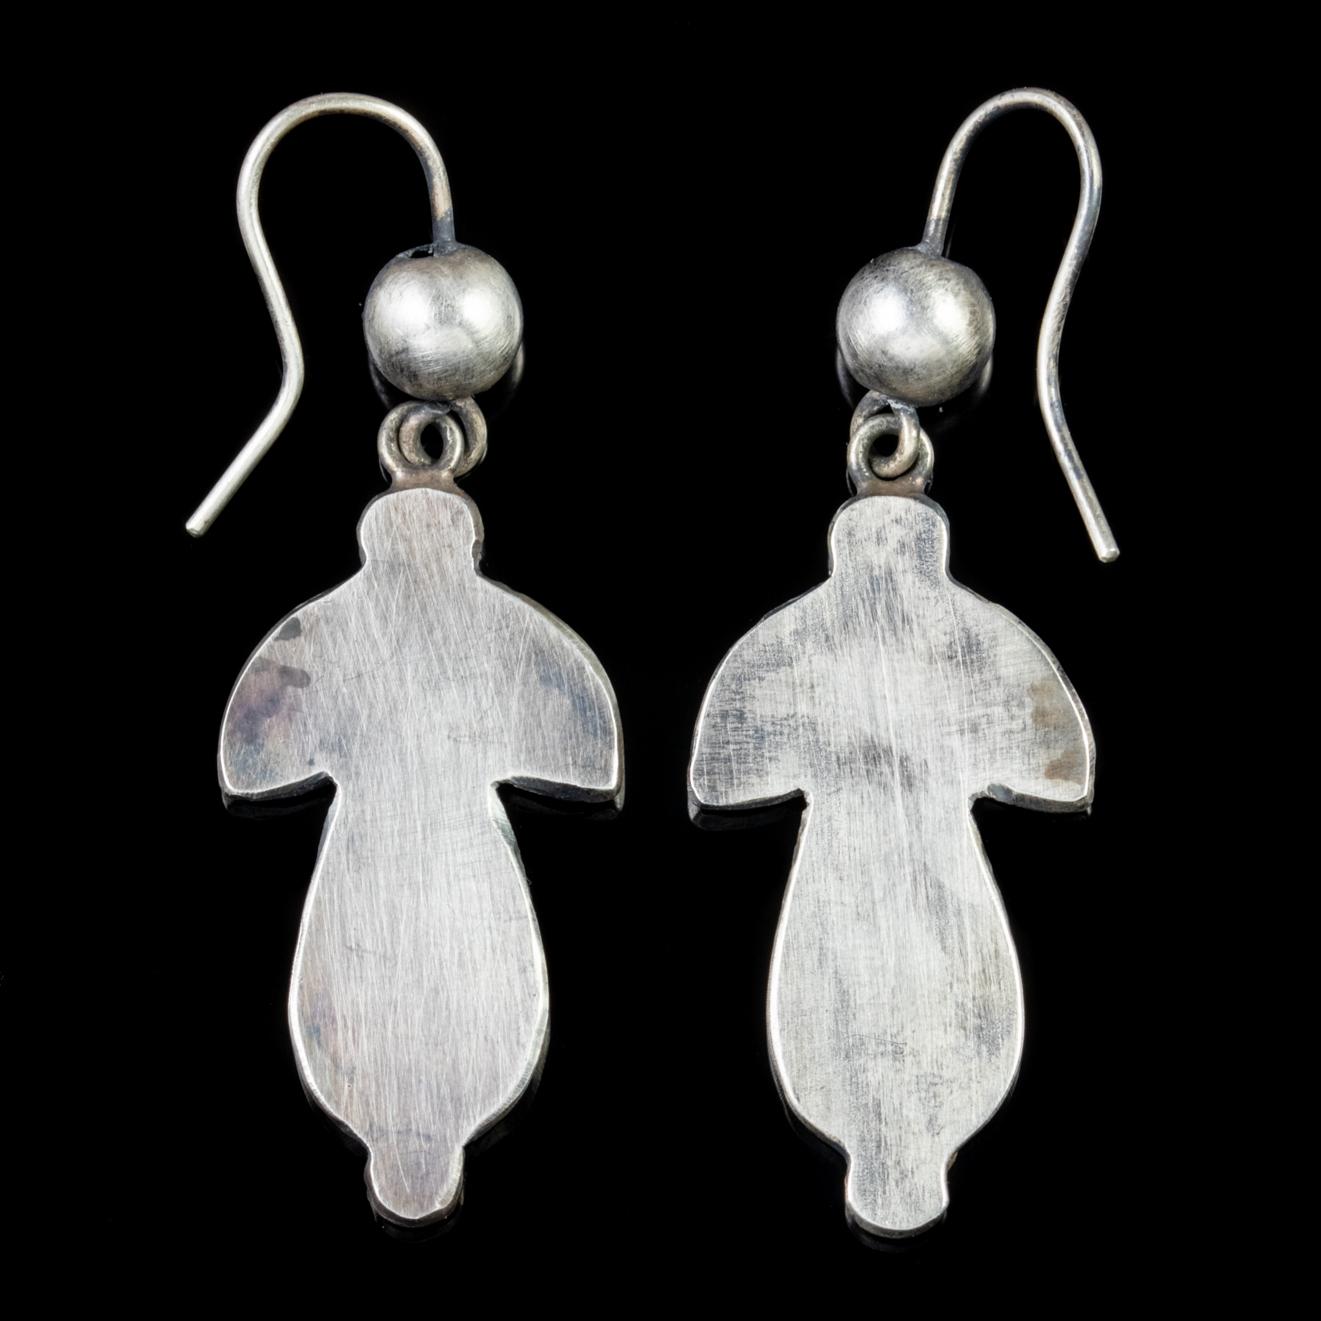 These early Victorian drop earrings are beautiful examples of the Scottish jewellery which was popular during this period. 

Scottish jewellery was endorsed by Queen Victoria as it became a souvenir of her frequent trips to Scotland and her Scottish